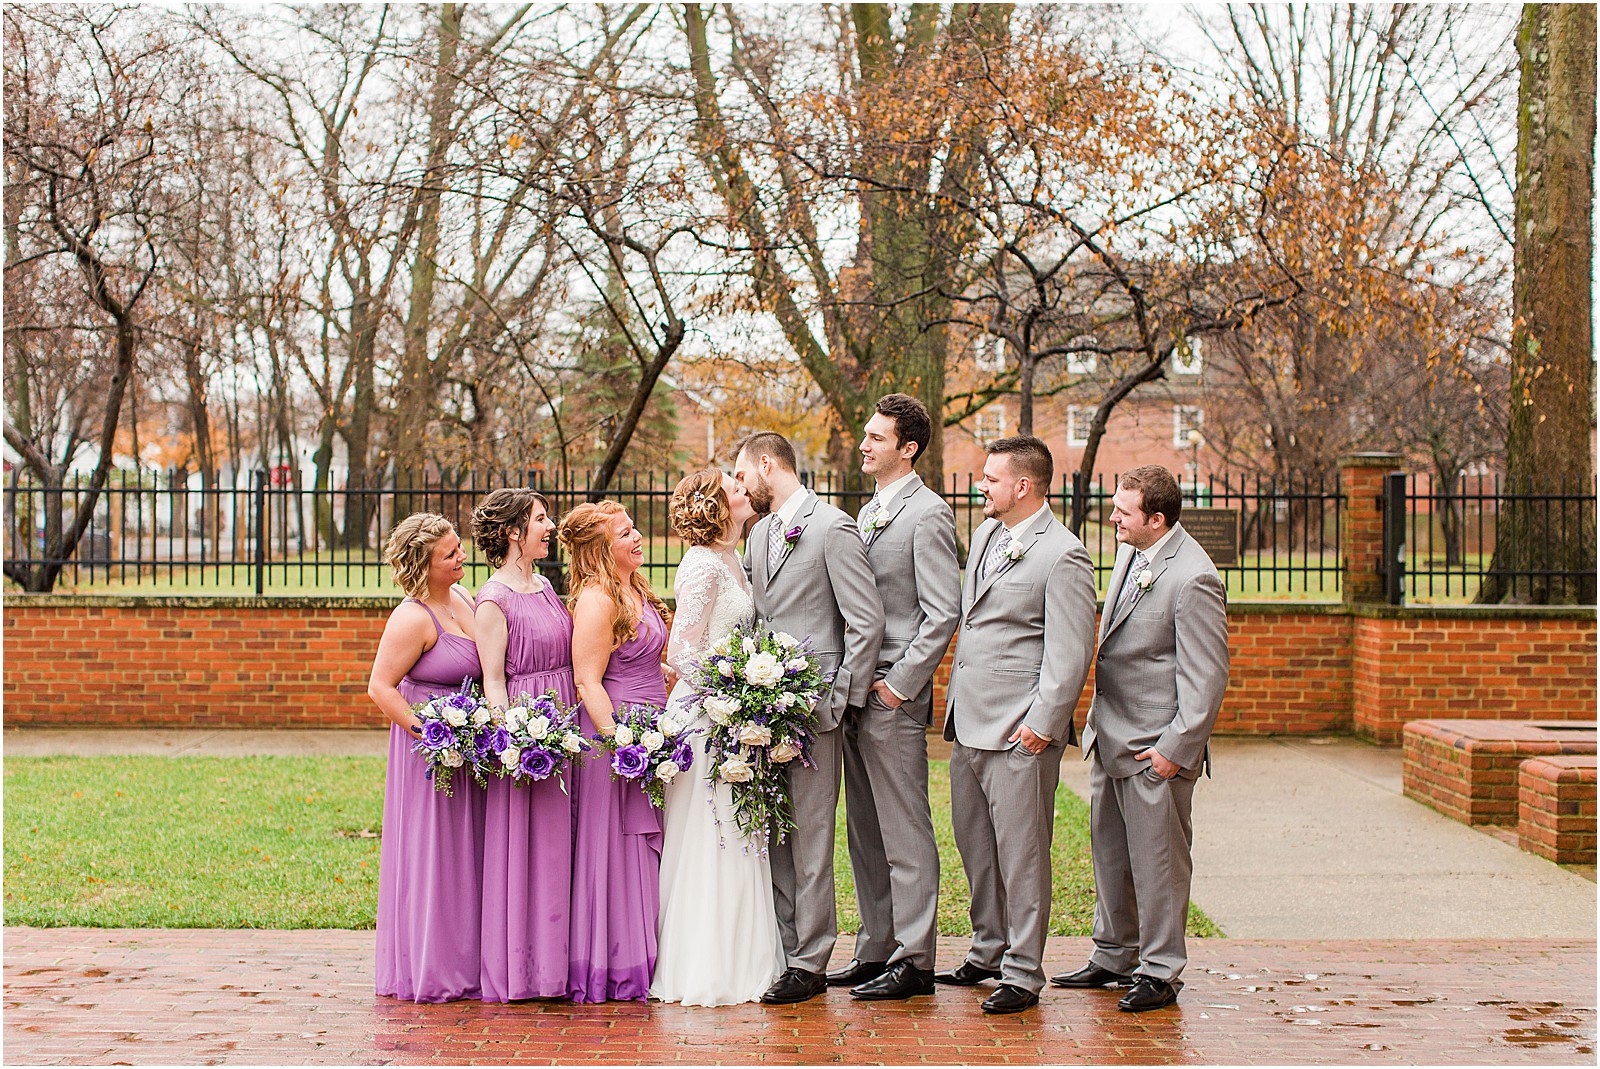 Amy and Logan | A Rainy New Harmony Indiana wedding | Bret and BRandie Photography | Bret and Brandie Photography | 0055.jpg